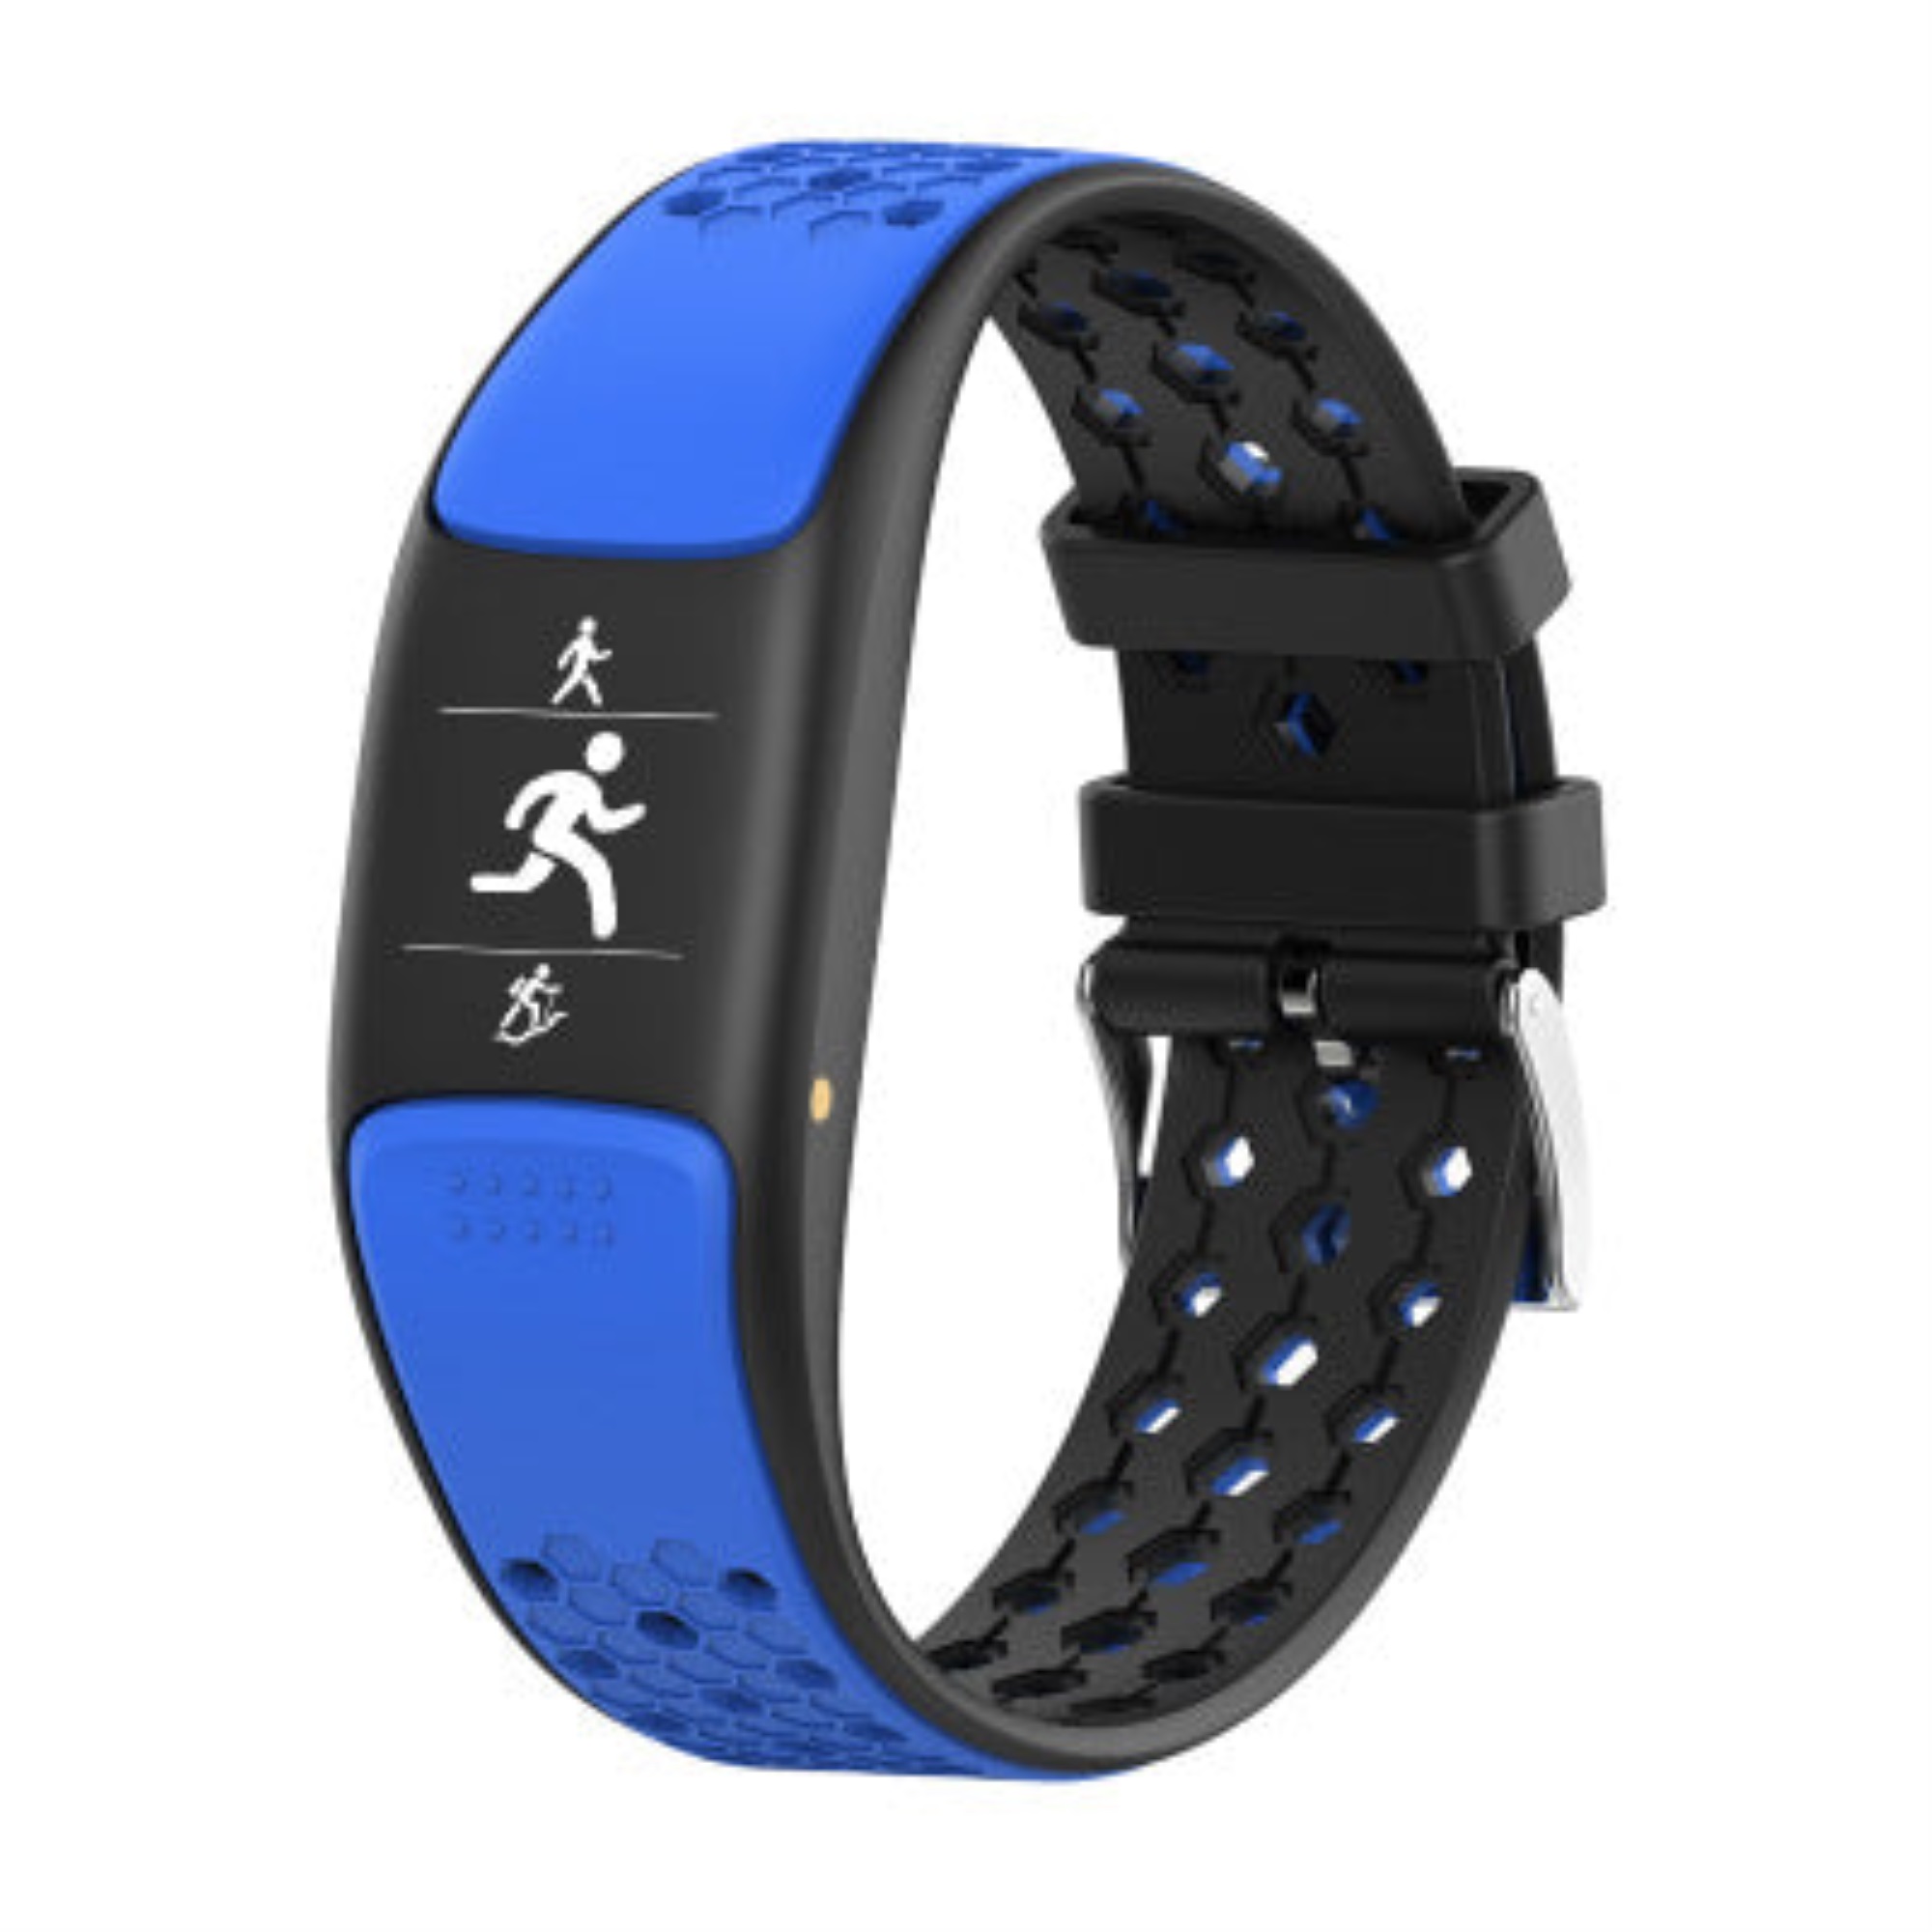 Smart Fit Sporty Fitness Tracker and Waterproof Swimmers Watch - Blue